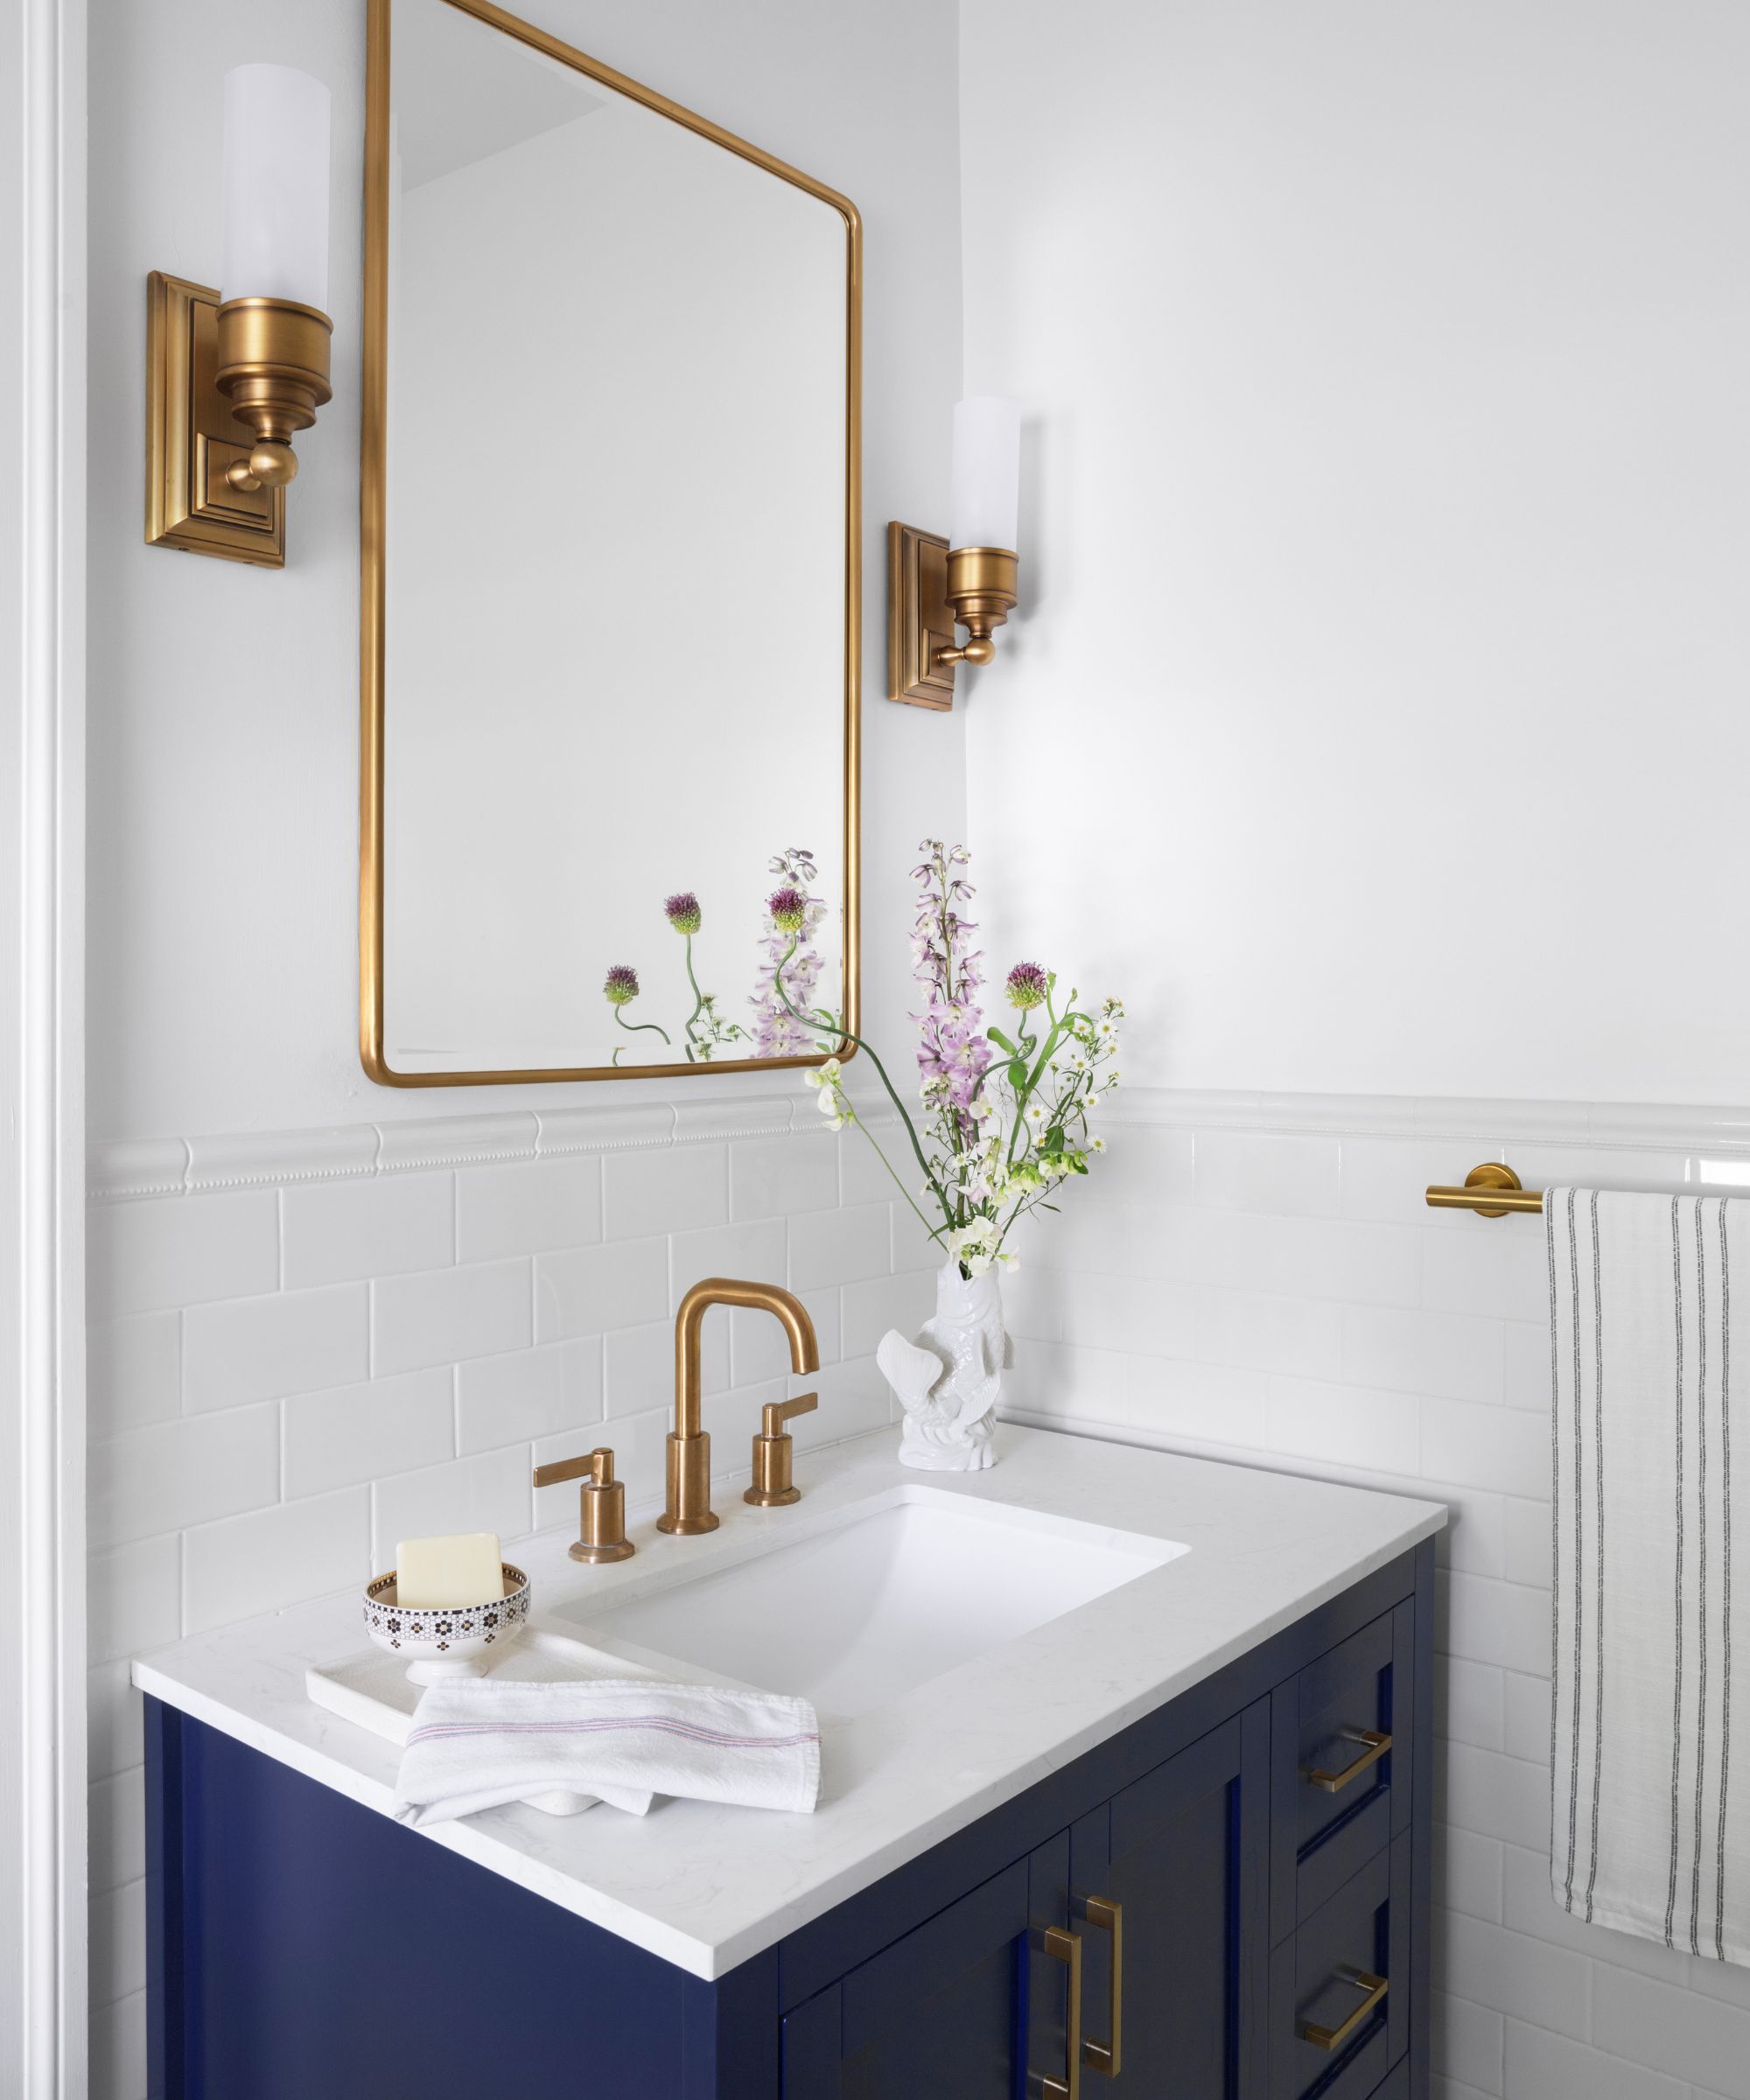 amazon, small bathroom upgrades — 5 stunning ideas that will make your space shine